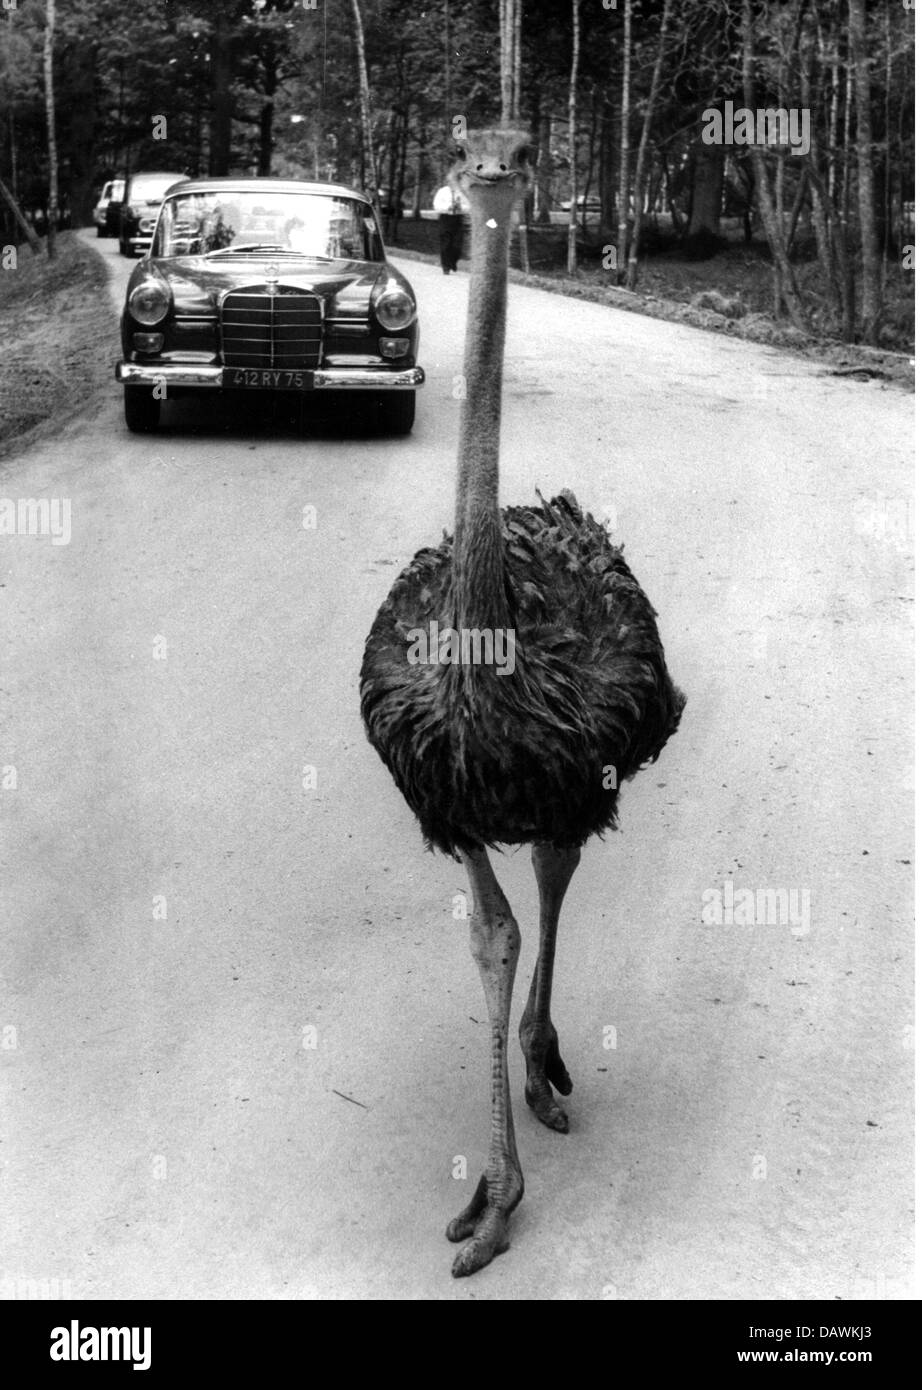 zoology, zoo, Chateau de Thoiry, Yvelines, France, game reserve for African animals, ostrich (Struthio Camelus) on a road, 9.5.1968, Additional-Rights-Clearences-Not Available Stock Photo